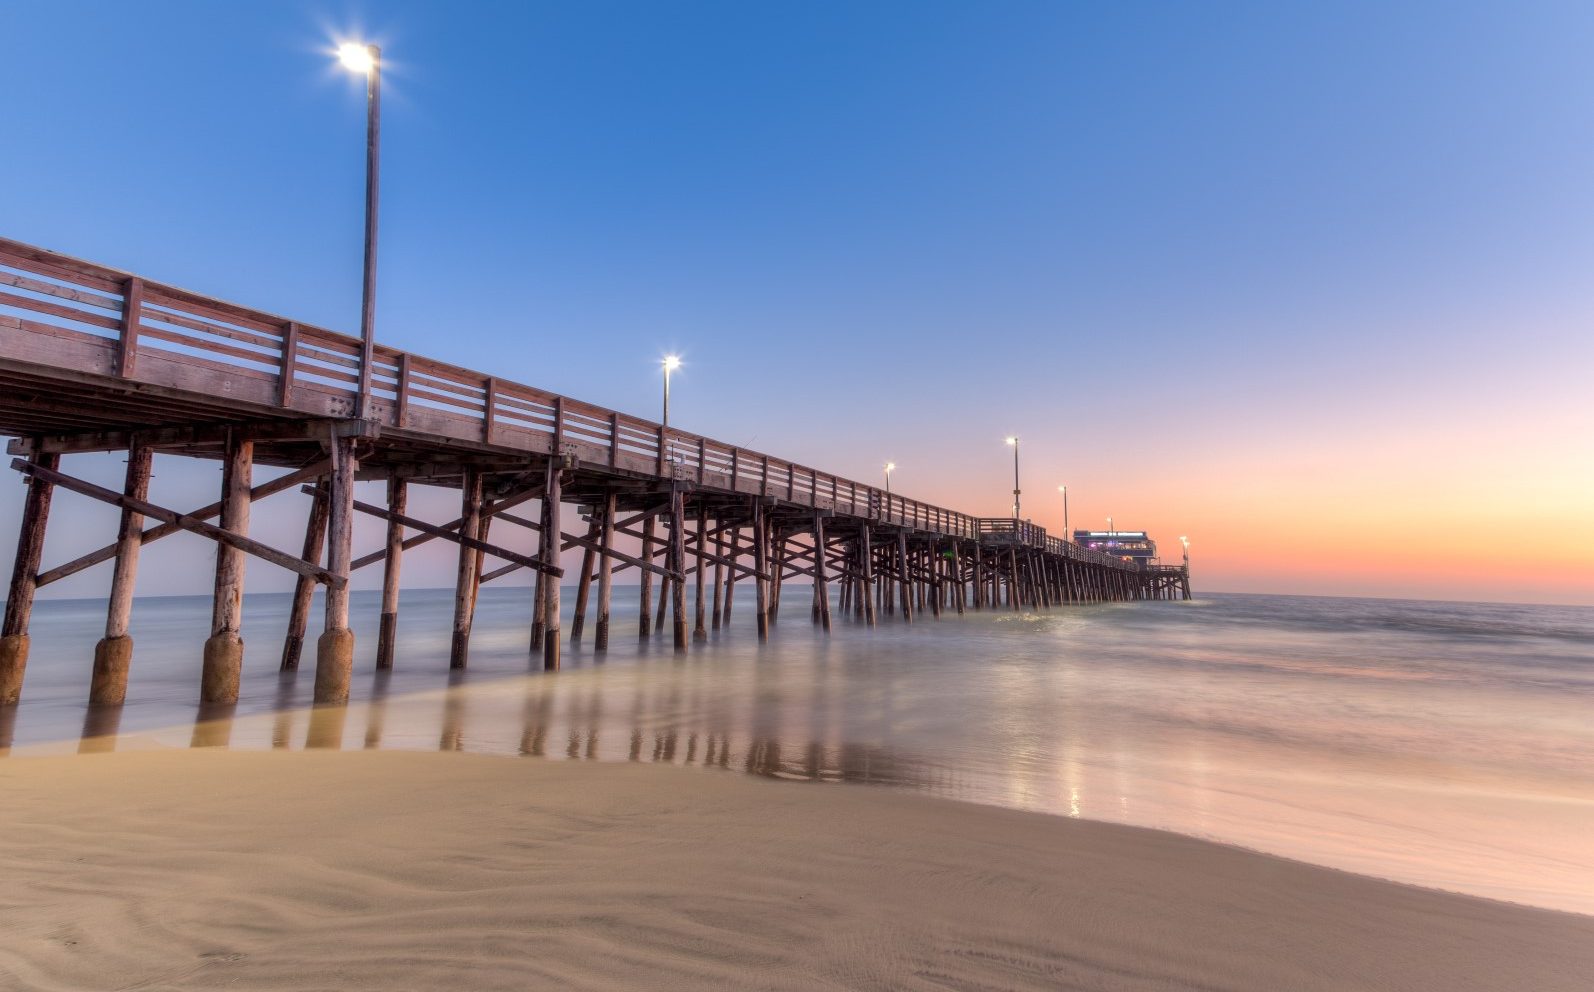 View of the Newport Beach pier from the sand